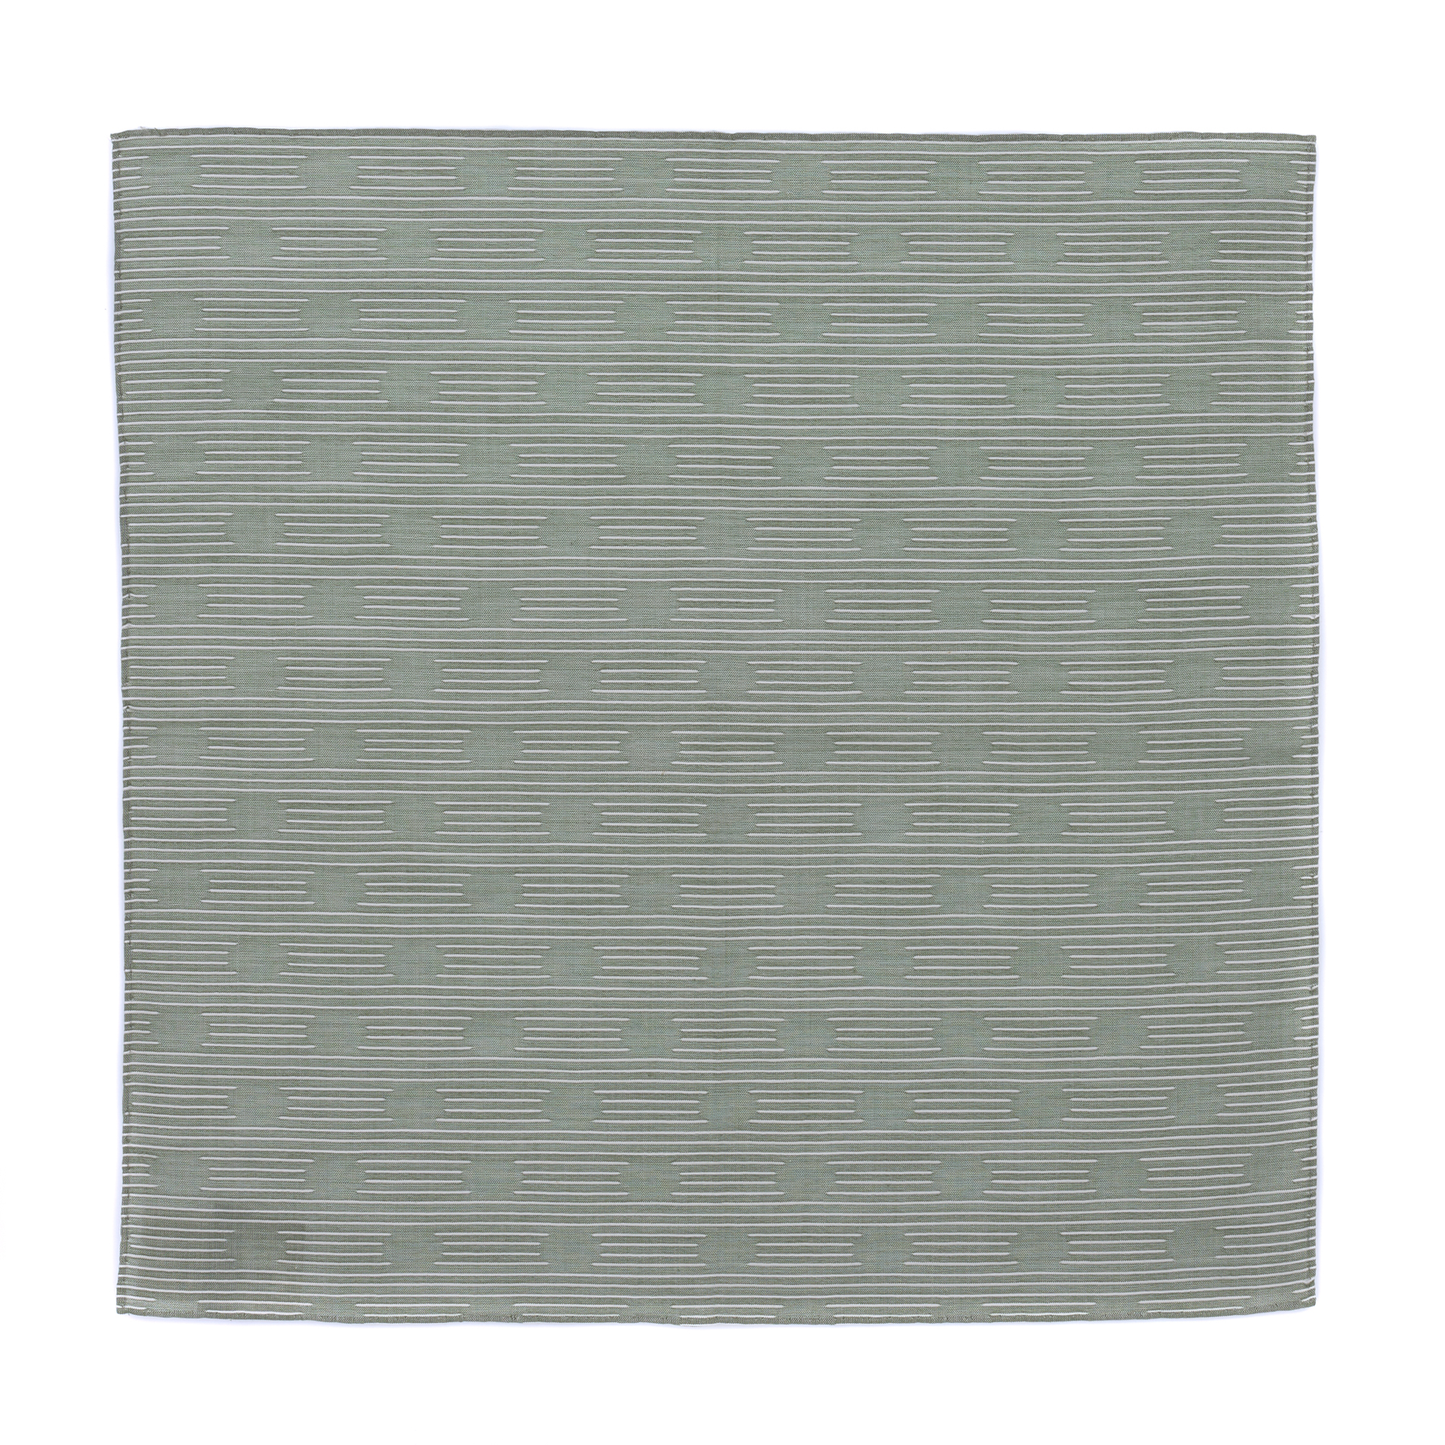 Printed Cotton Pocket Square in Light Green